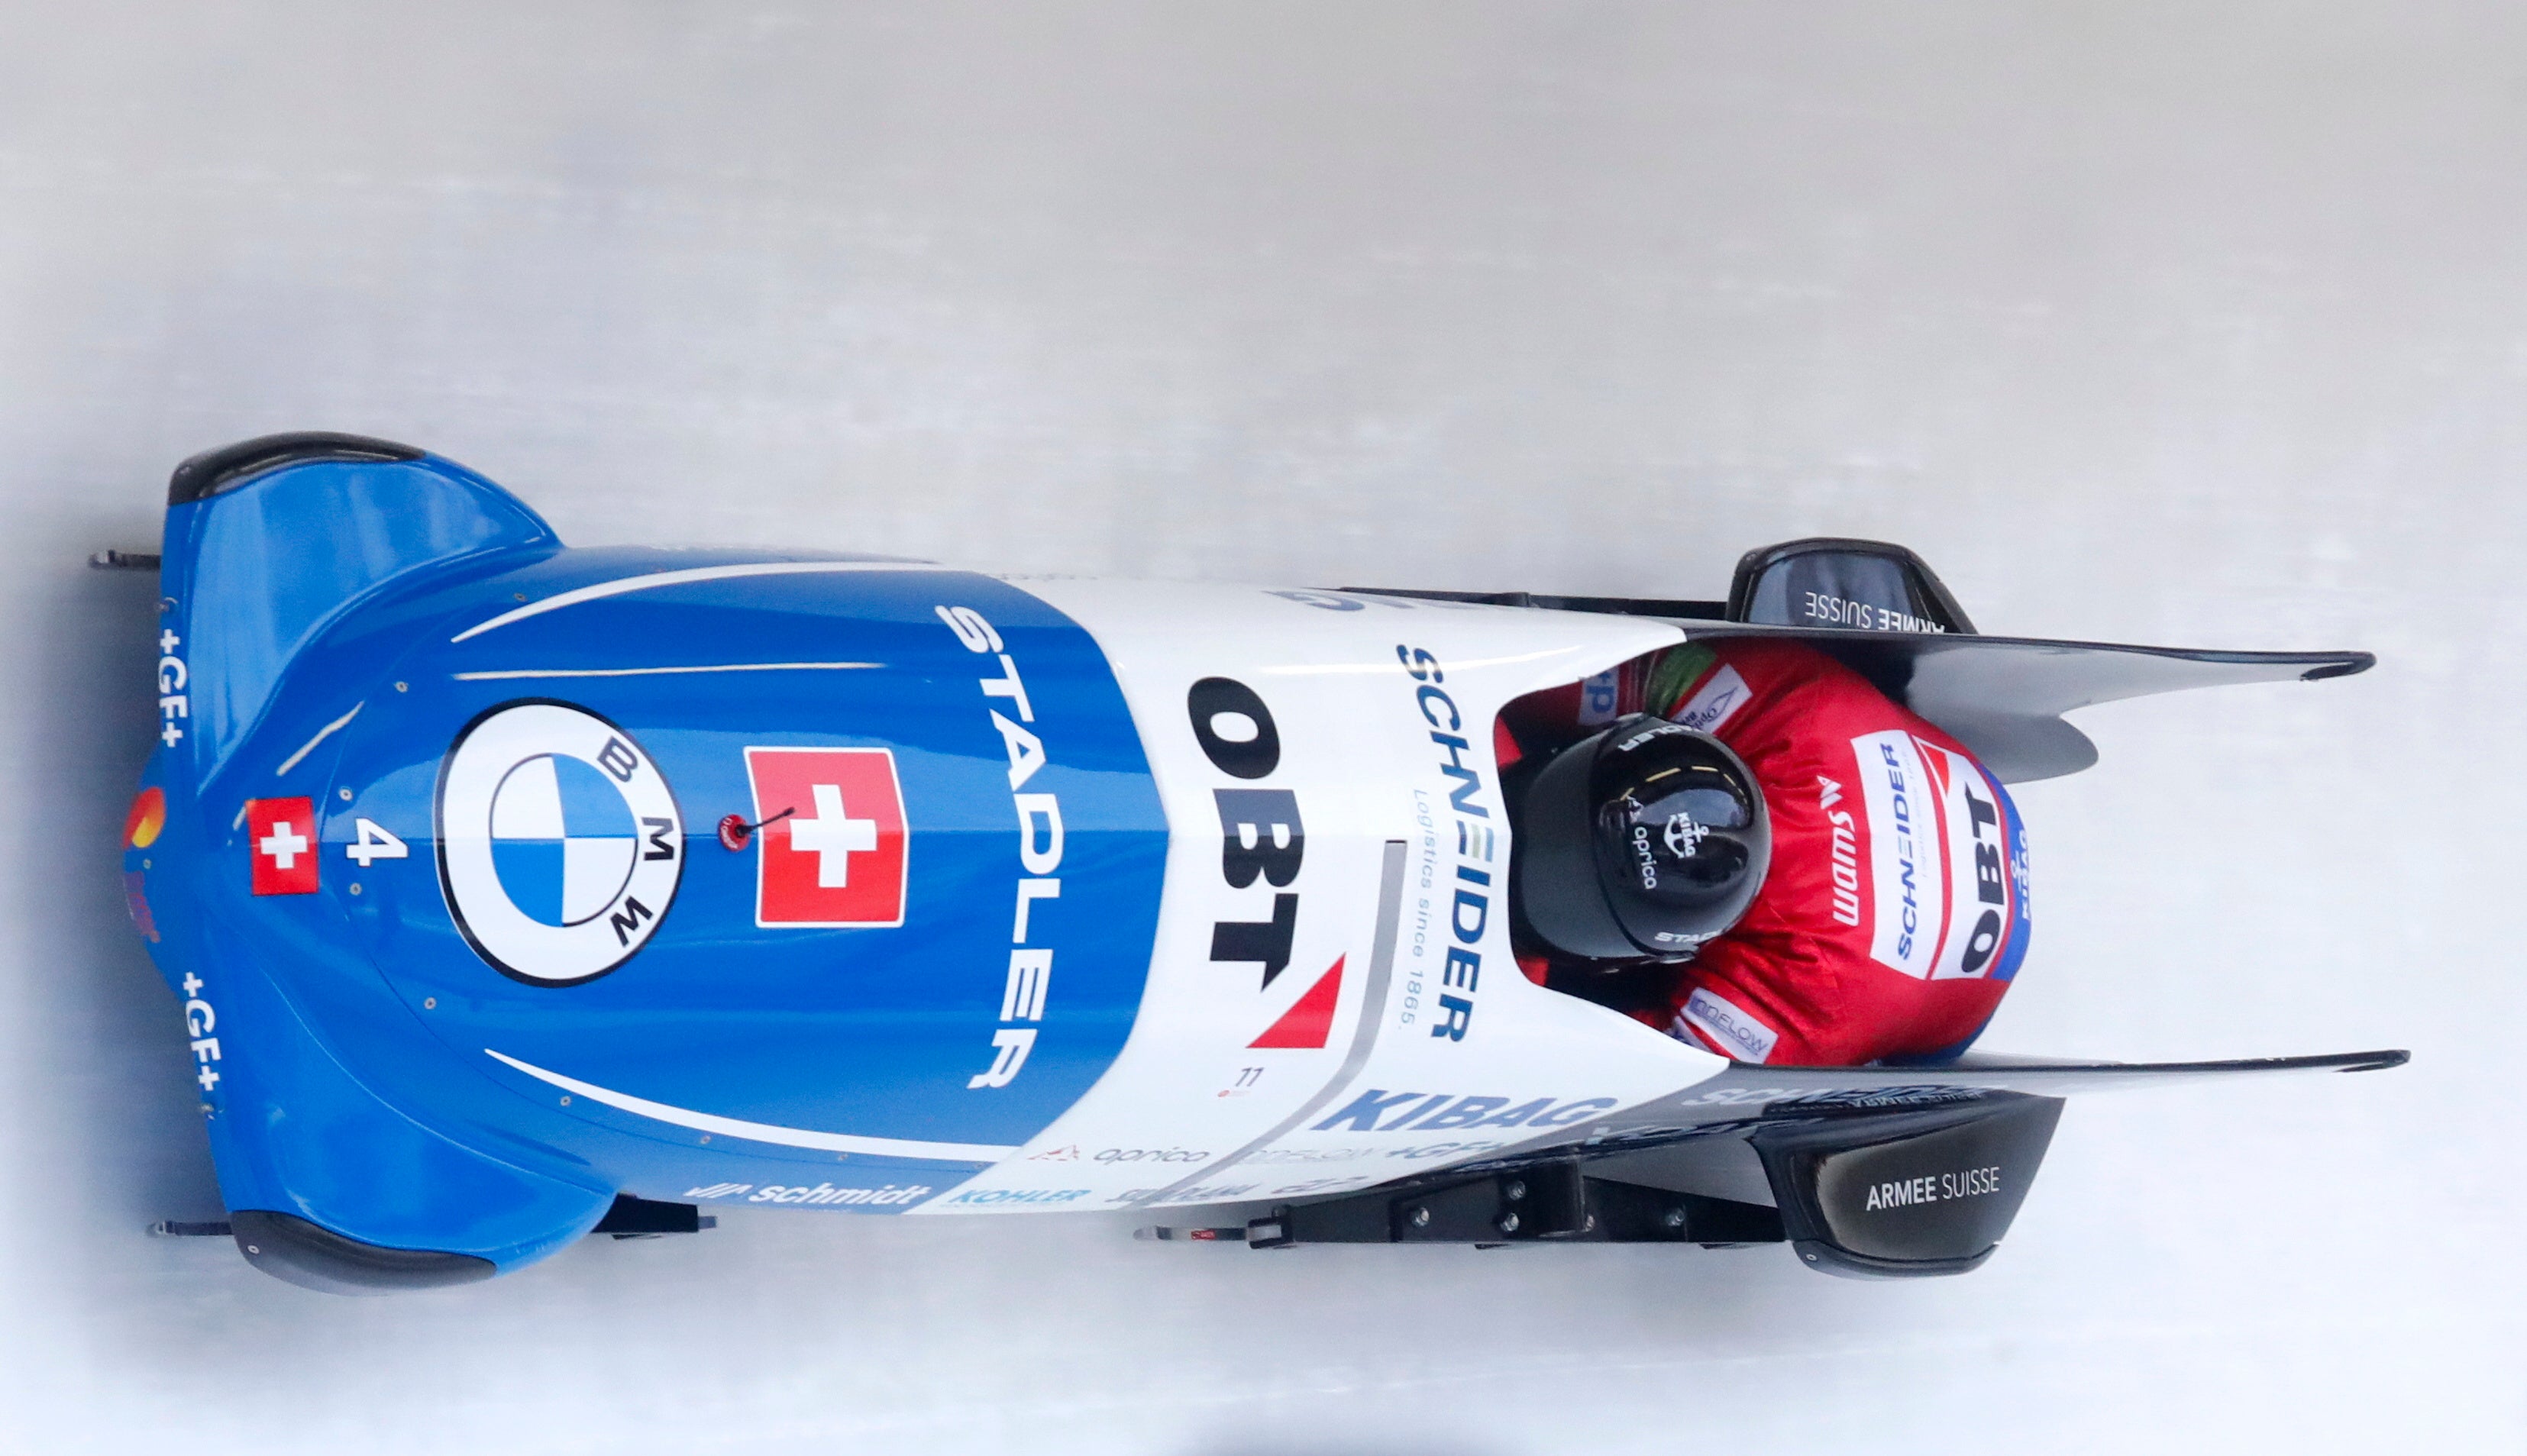 Sandro Michel was run over by his own bobsleigh